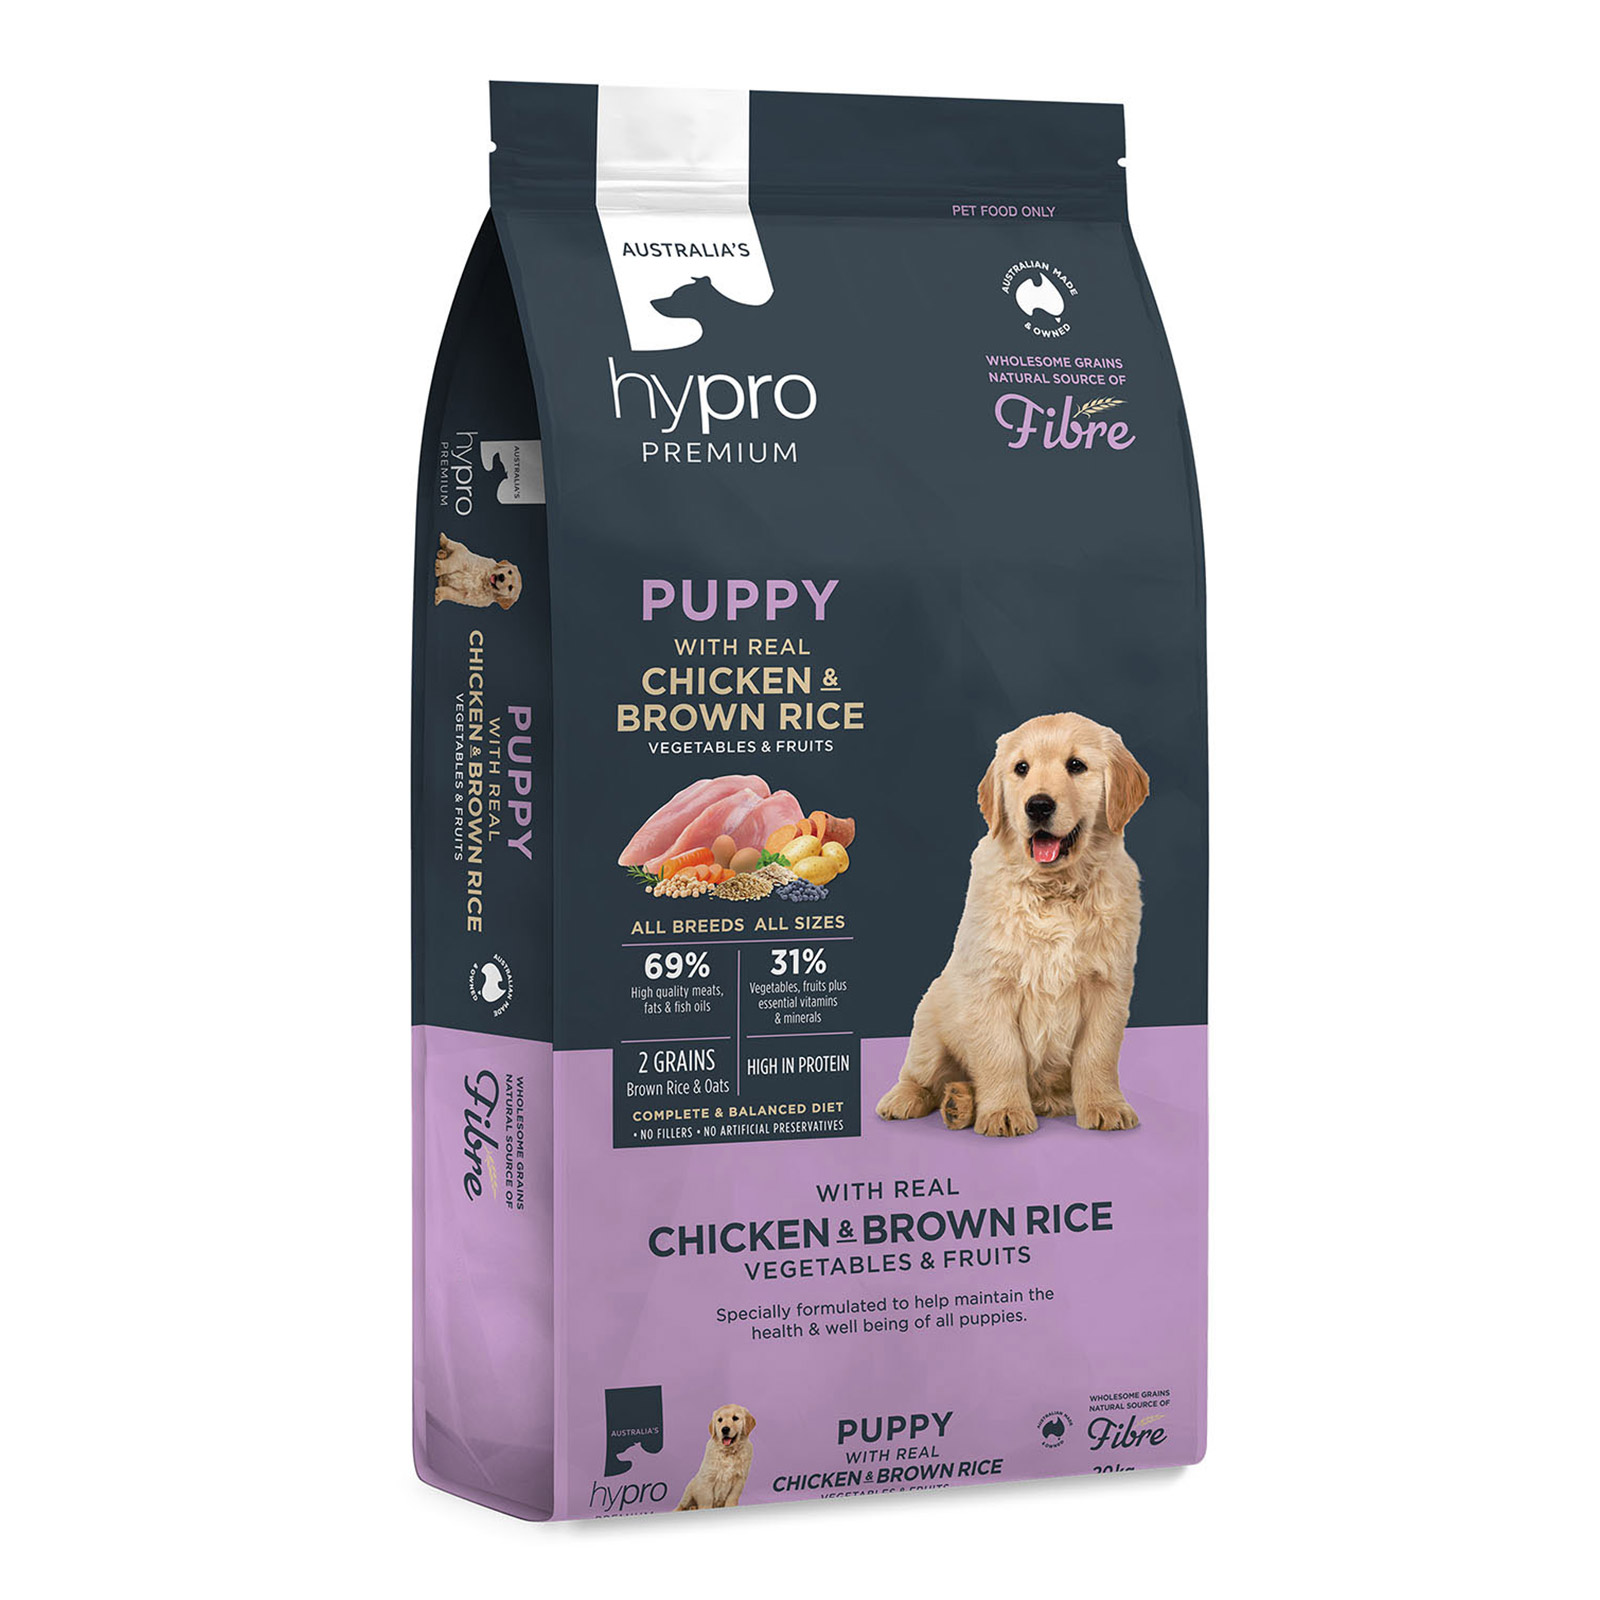 Hypro Premium Wholesome Grains Puppy Food (Chicken & Brown Rice) for Food